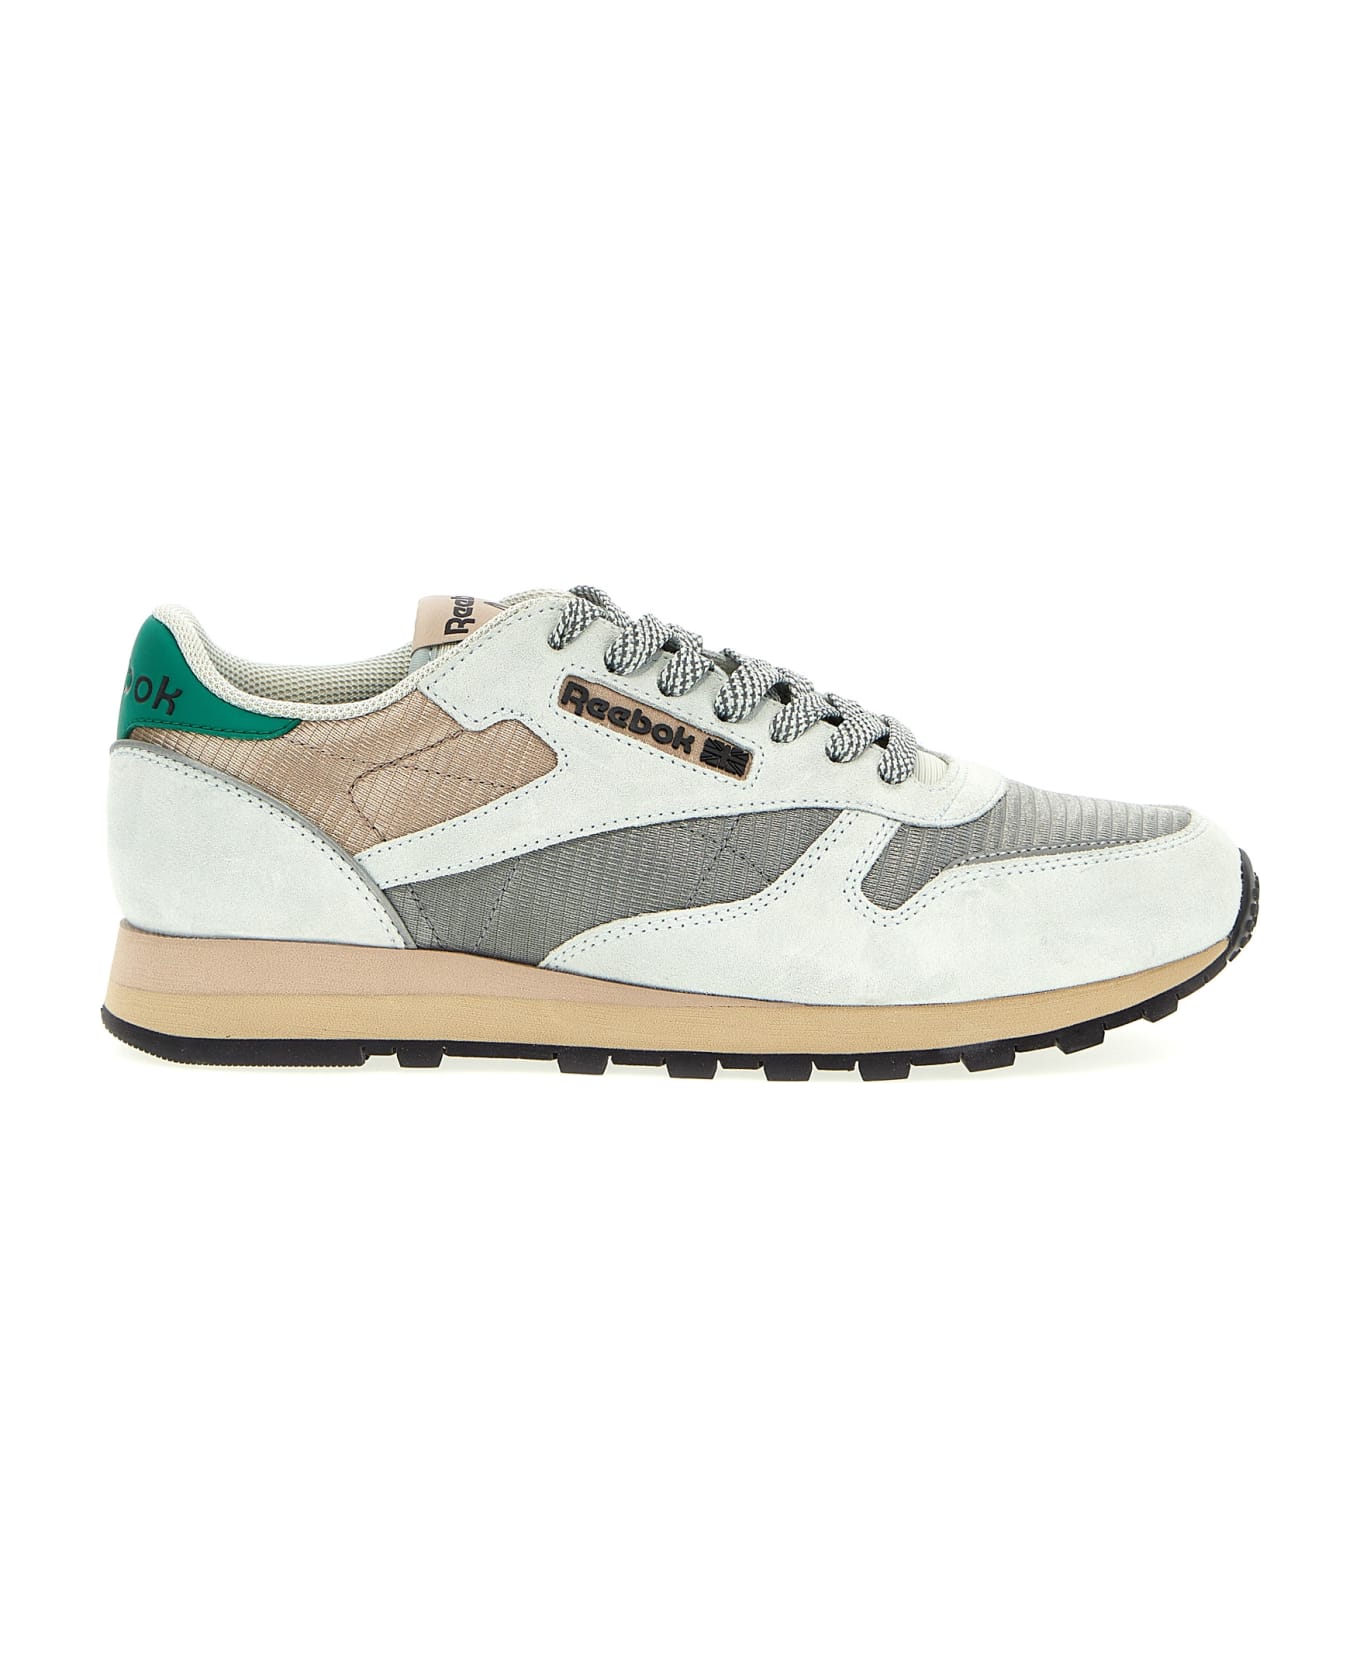 Reebok 'classic Leather' Sneakers - Multicolor